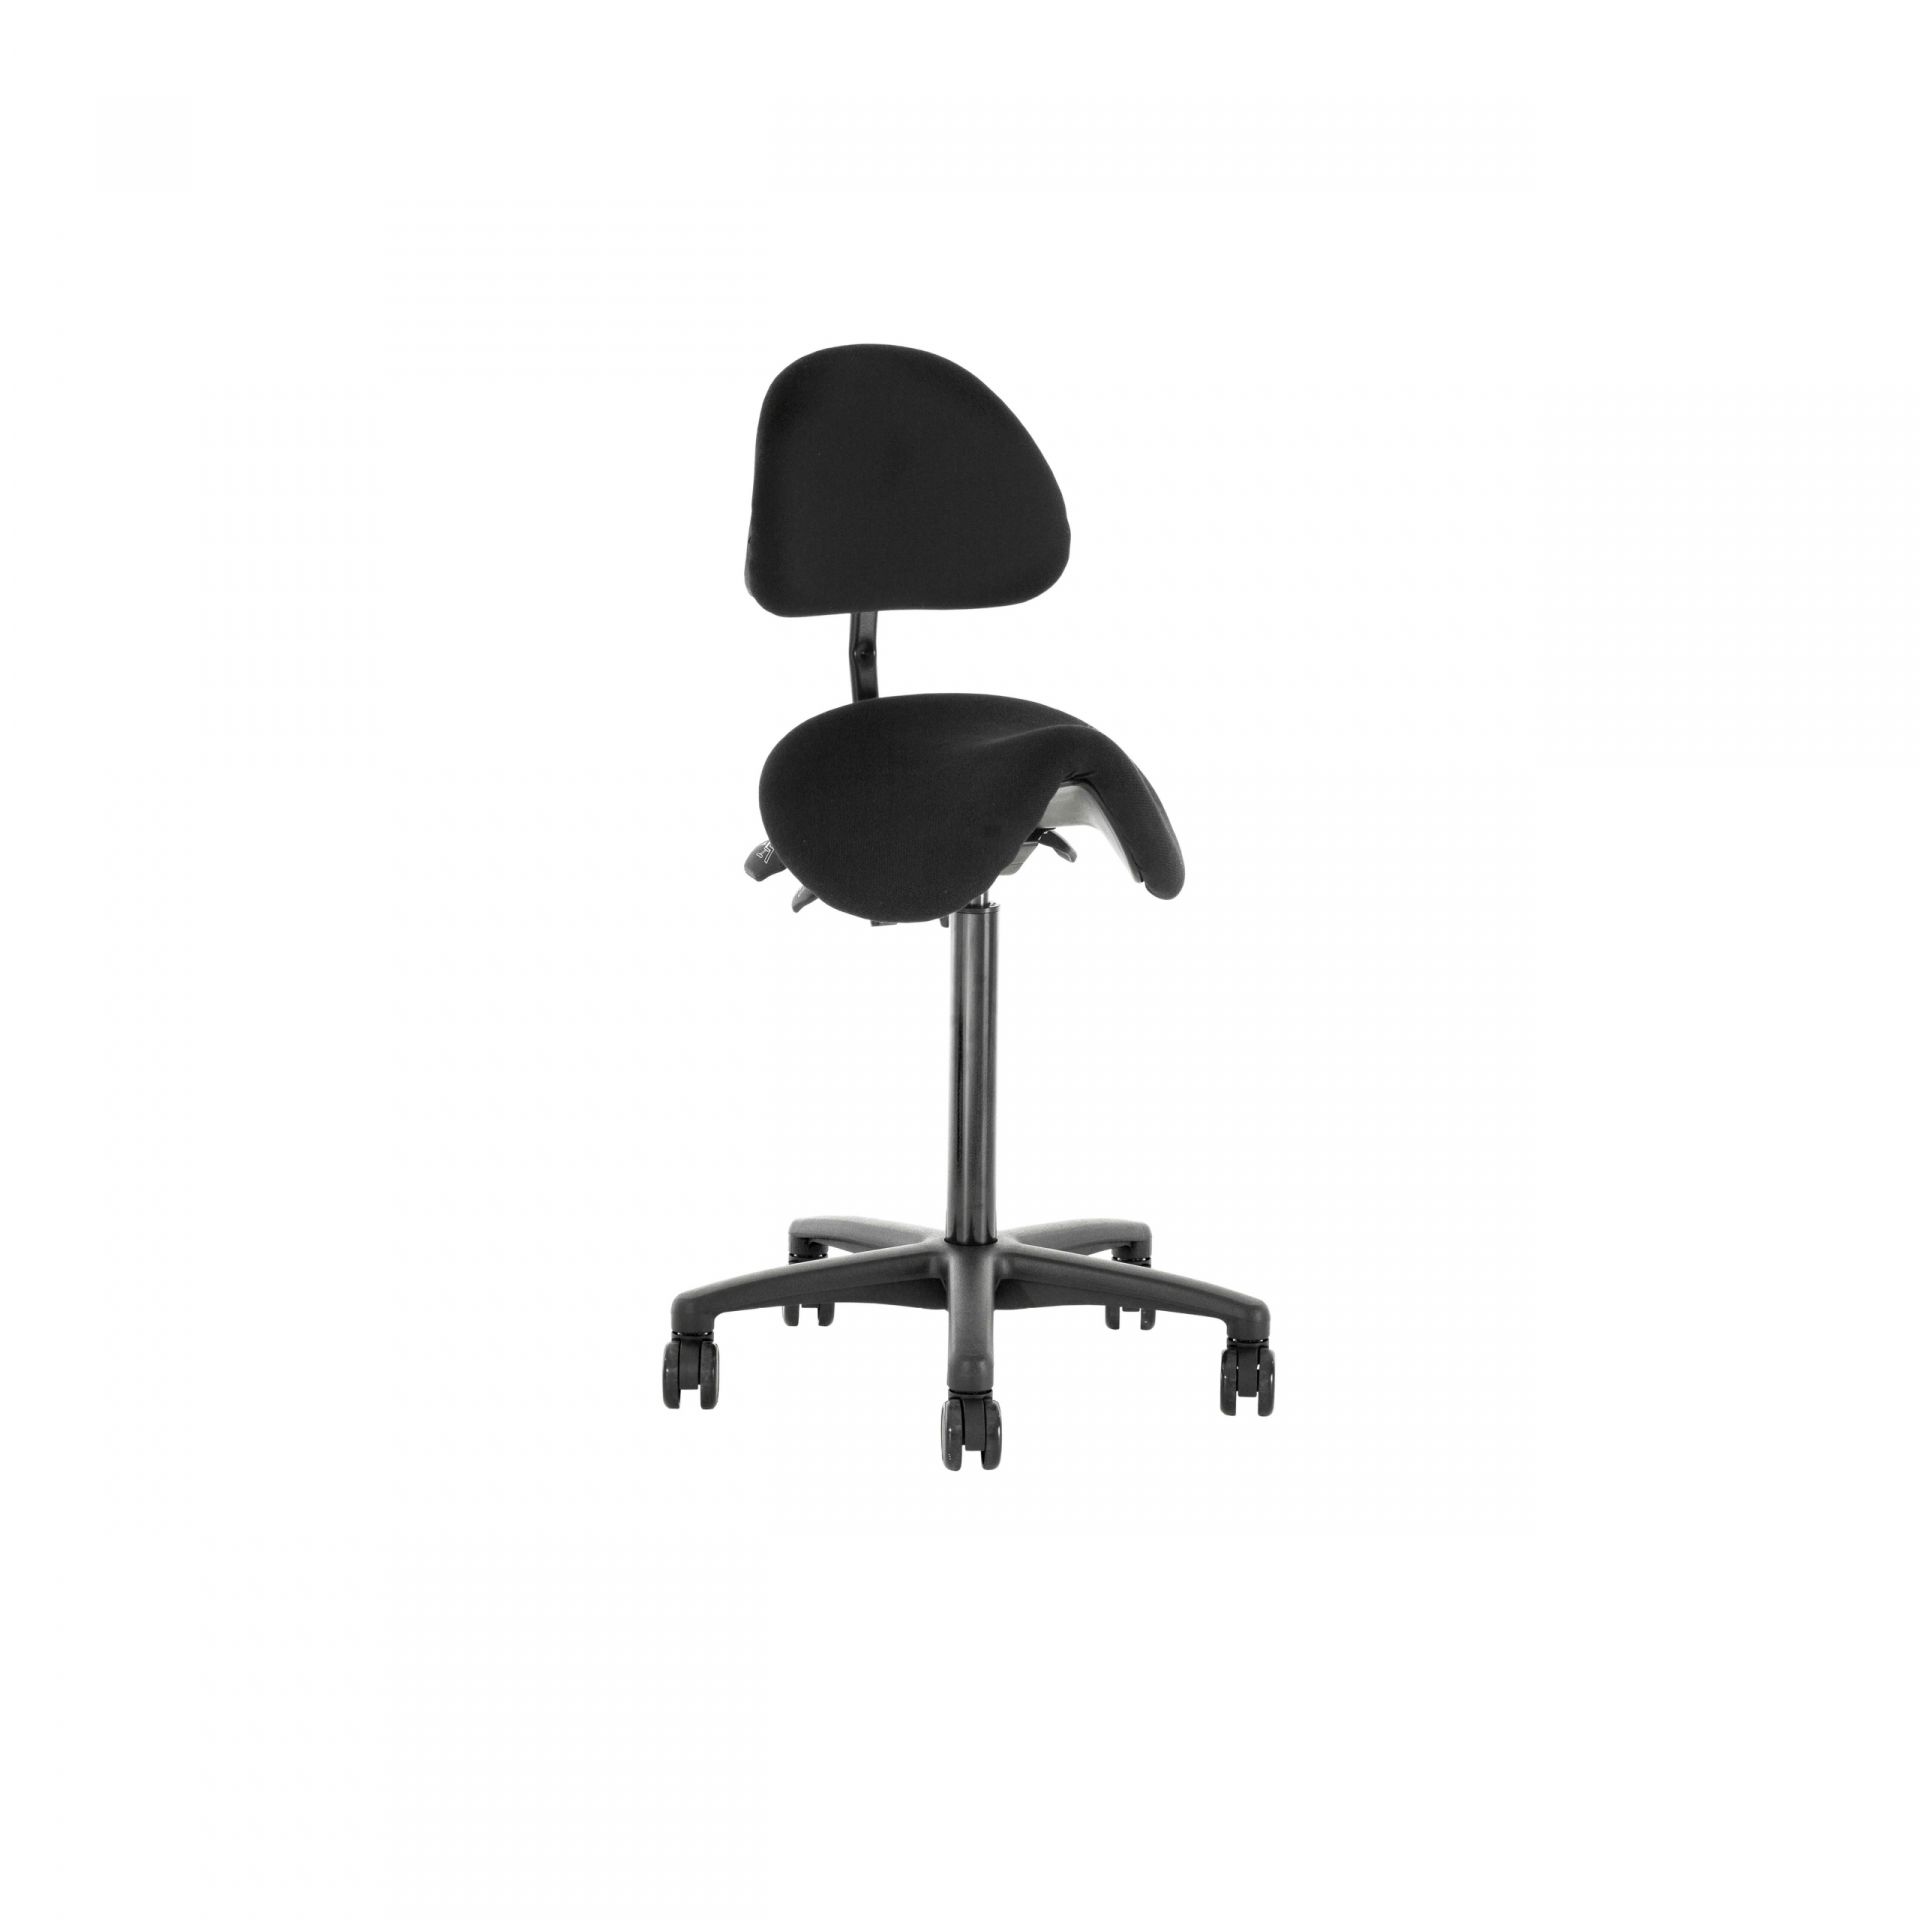 Saddle seat Office chair with saddle seat